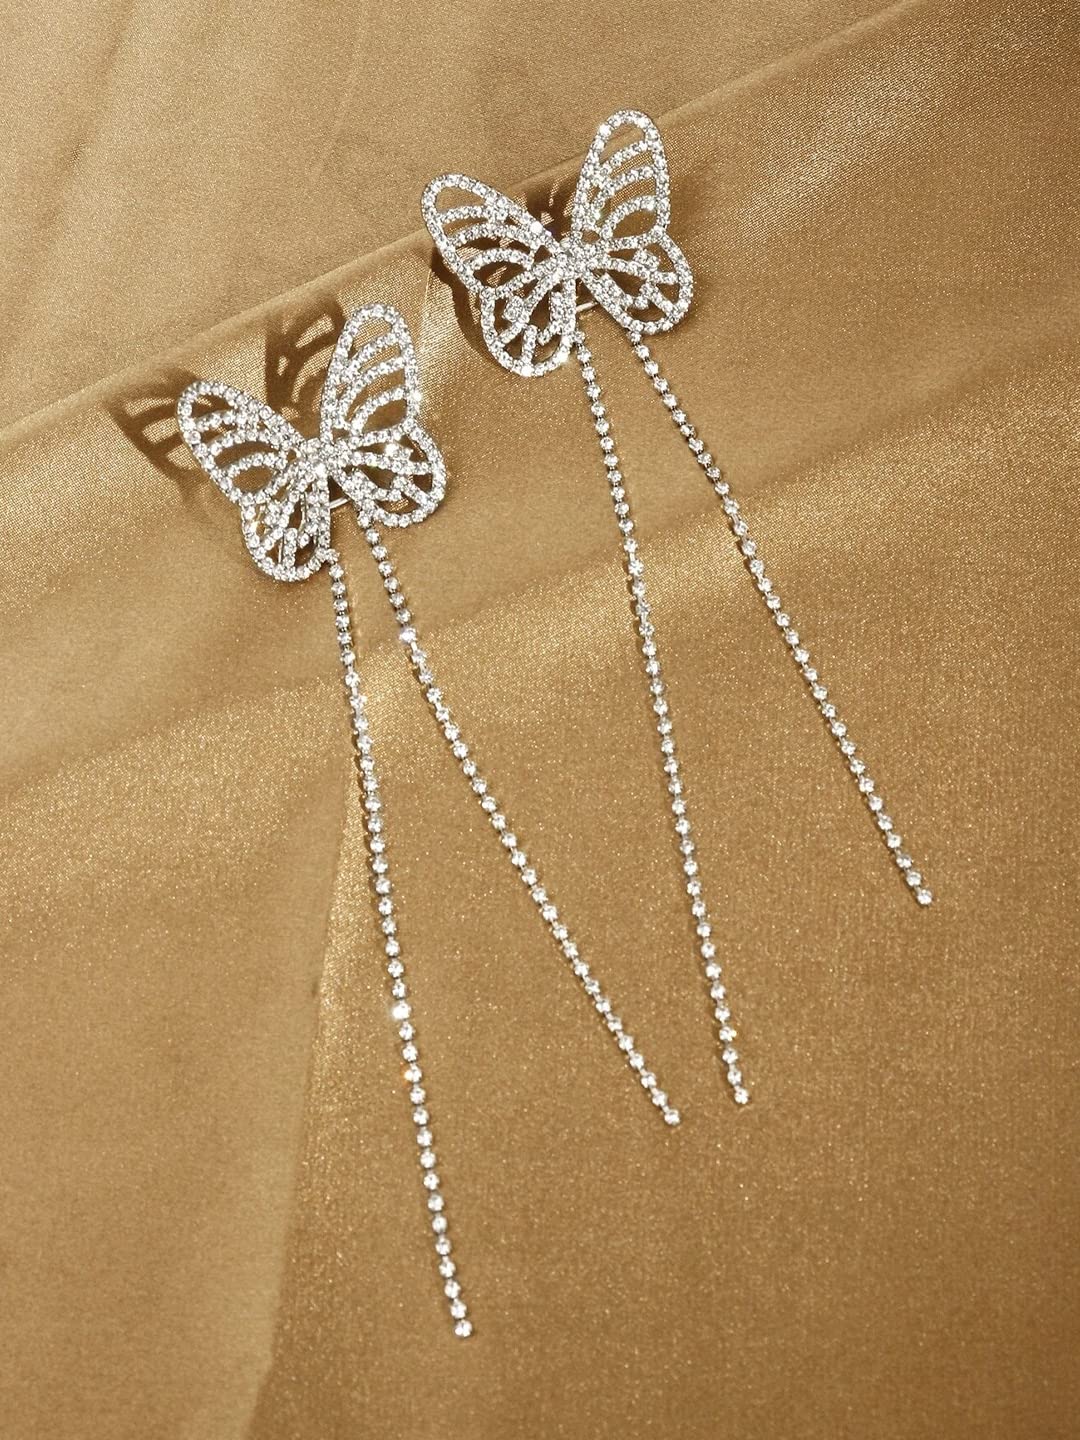 Yellow Chimes Earrings for Women and Girls Silver Dangler Earrings | Silver Toned Crystal Butterfly Long Chain Danglers Earrings for Women | Birthday Gift for girls and women Anniversary Gift for Wife